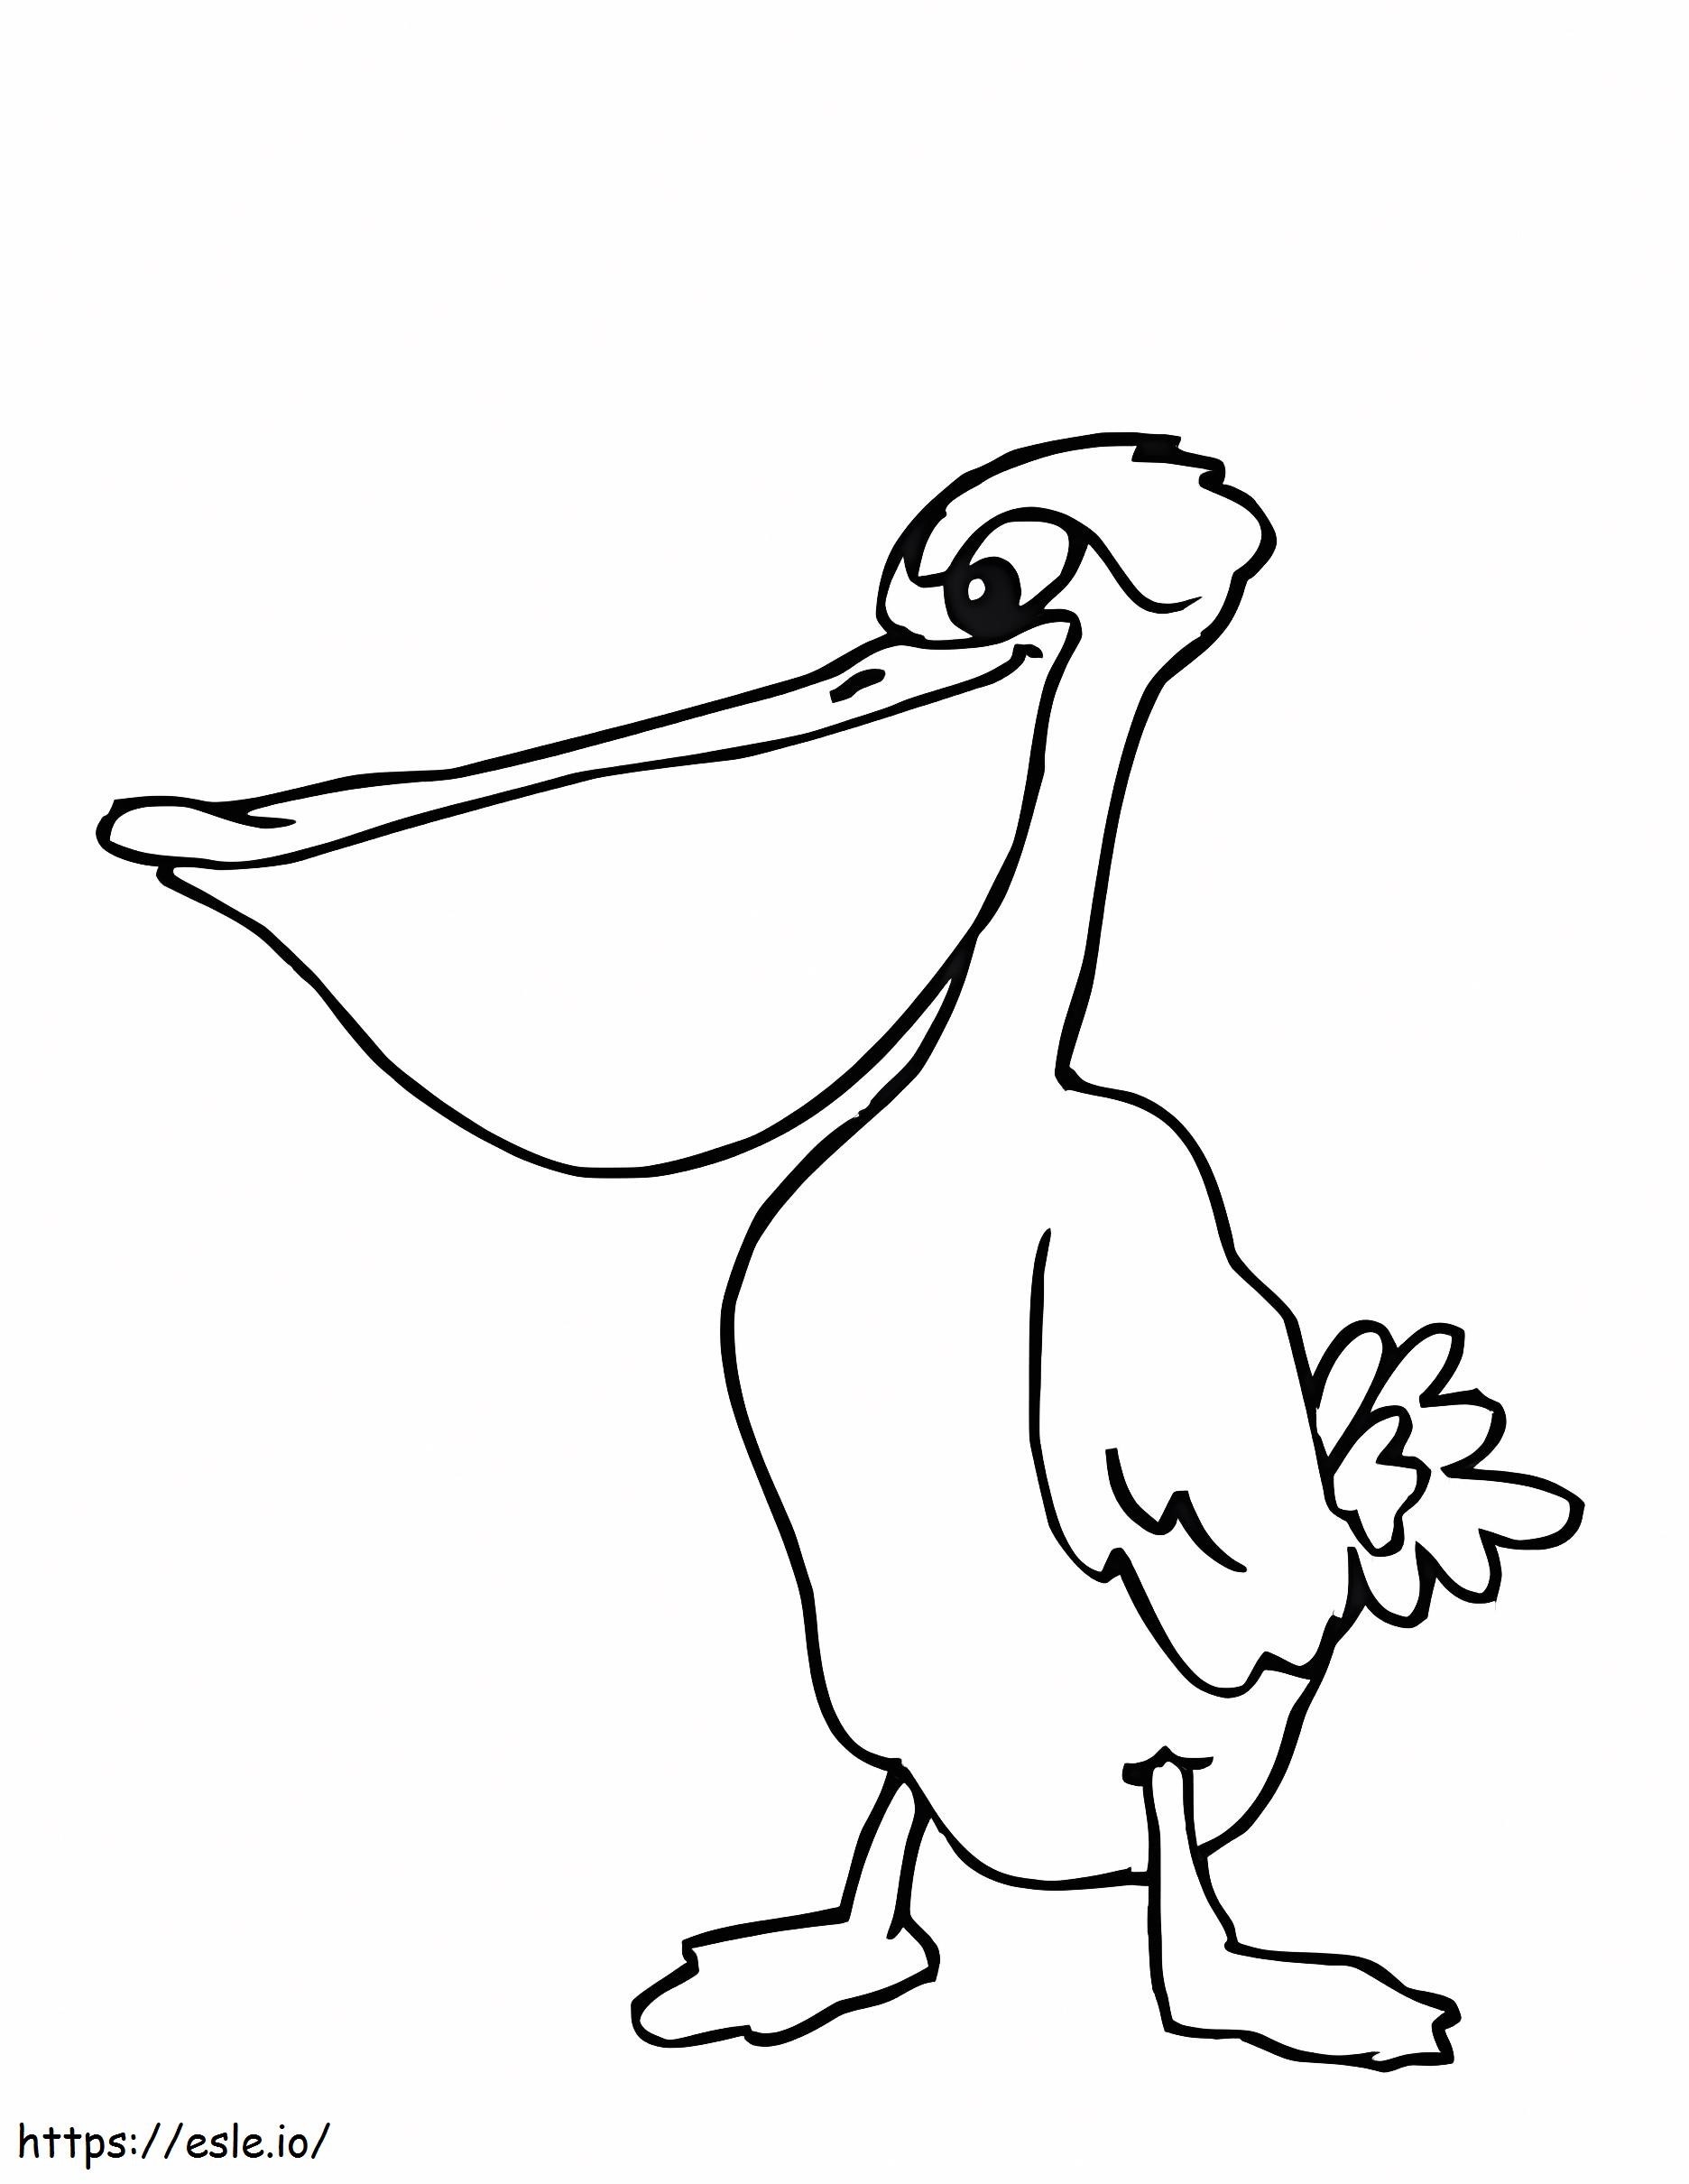 Basic Pelican coloring page